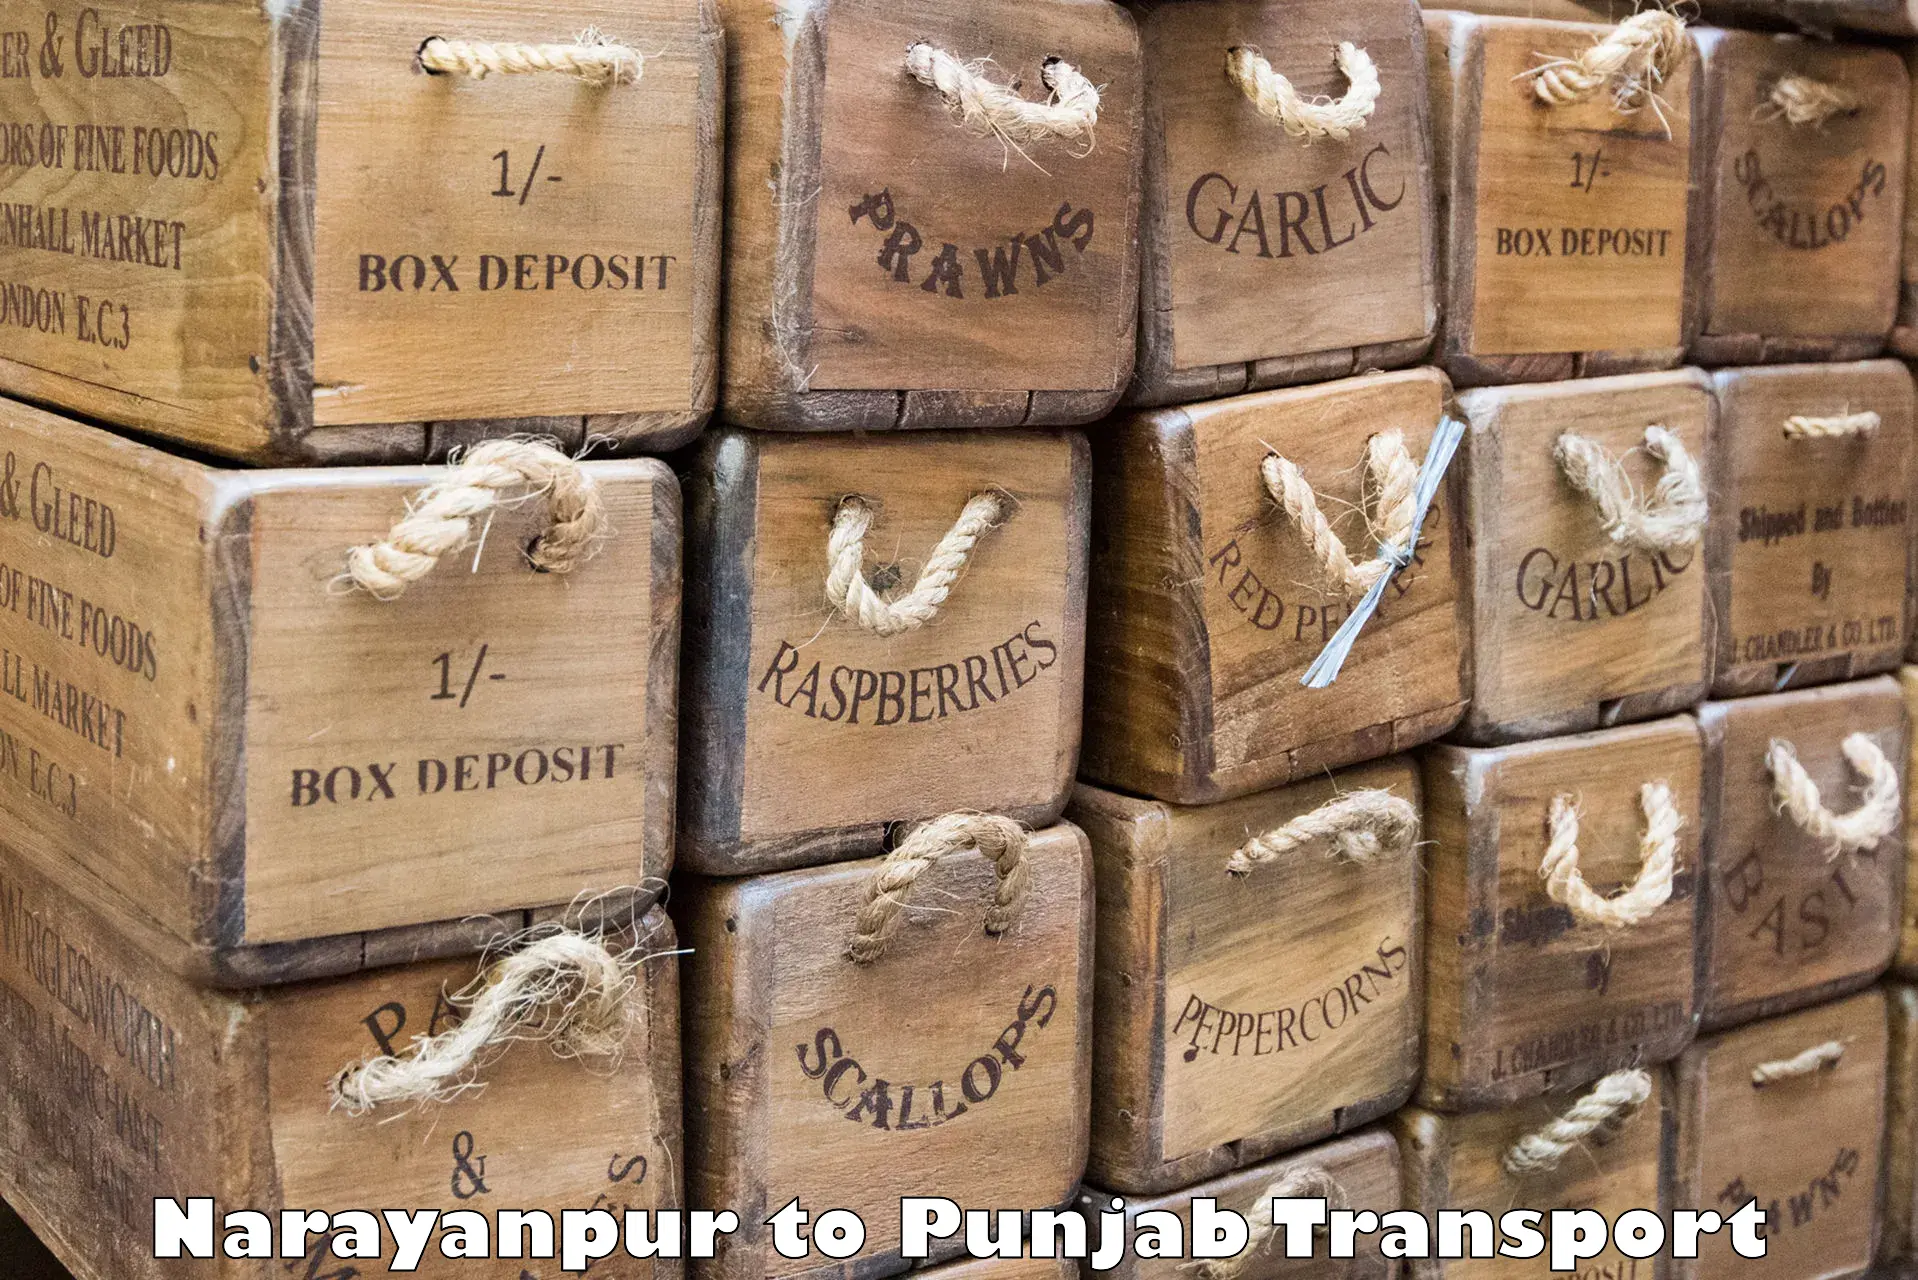 Container transport service Narayanpur to Begowal